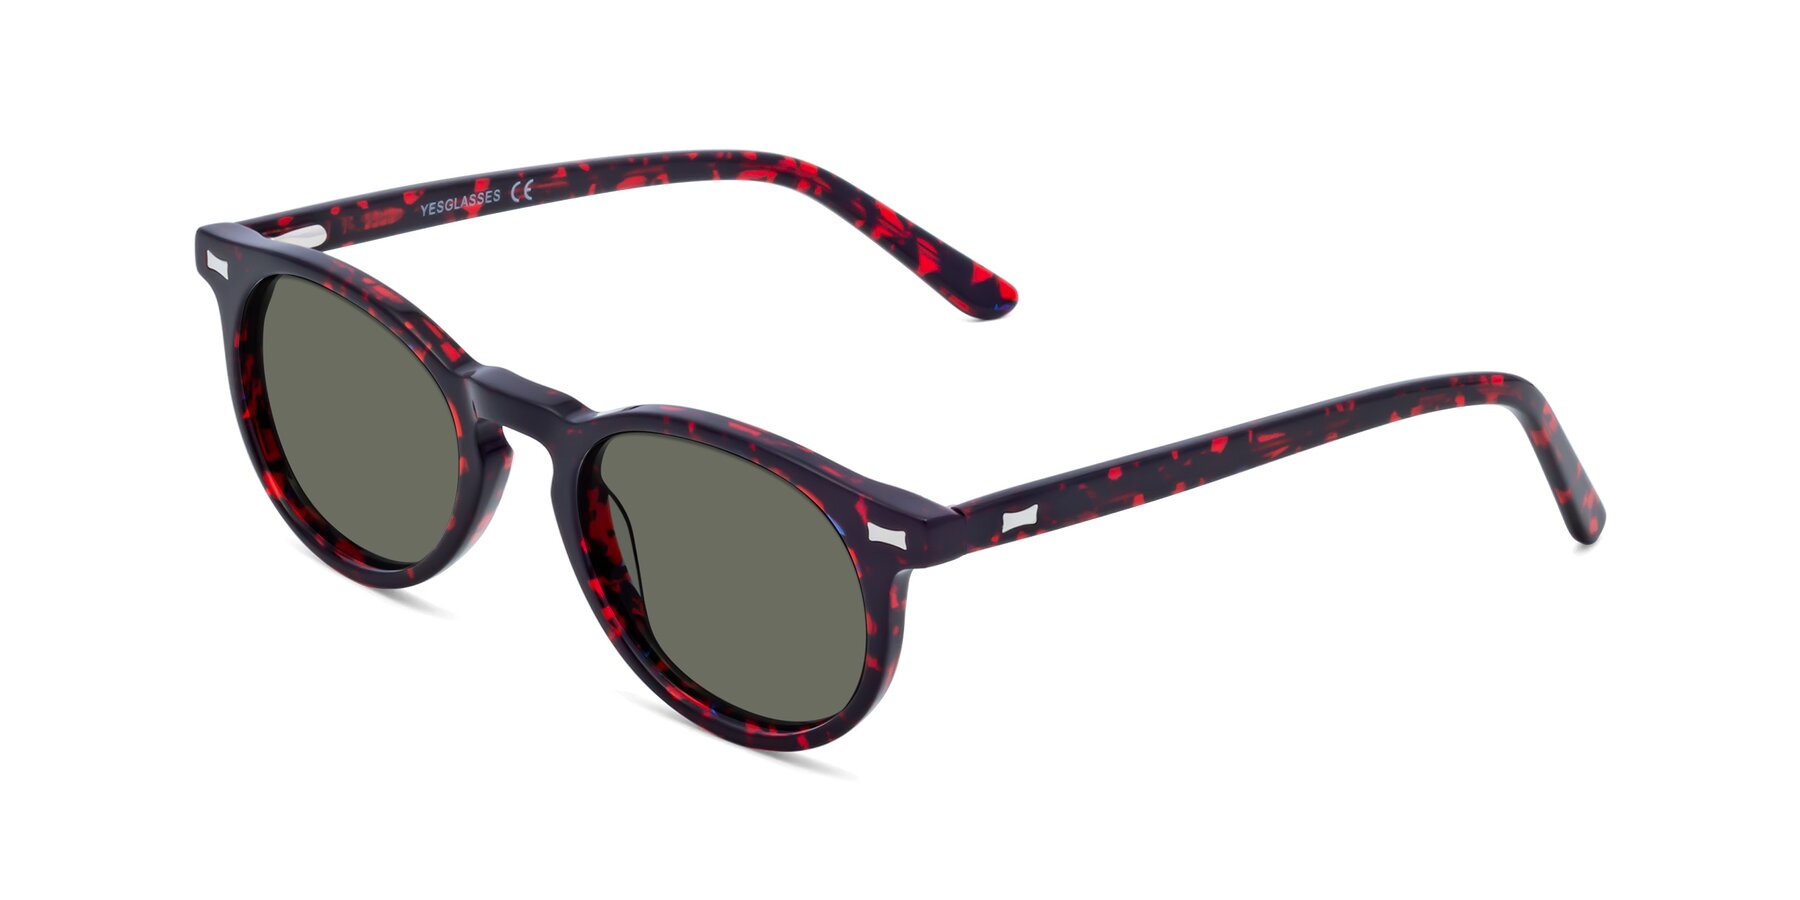 Angle of 17330 in Tortoise Wine with Gray Polarized Lenses